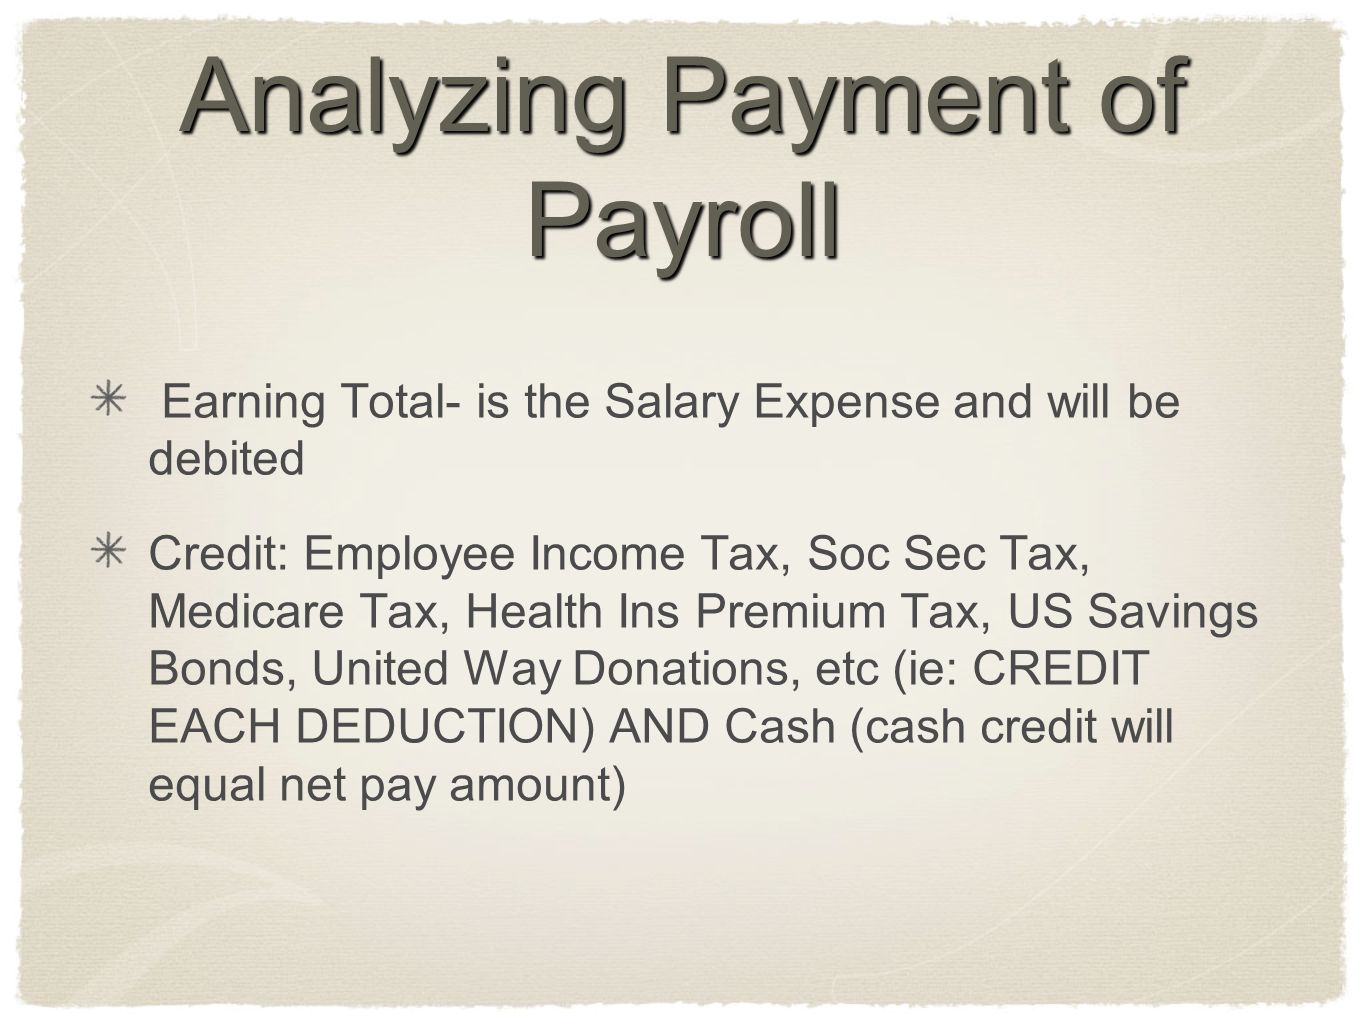 Analyzing Payment of Payroll